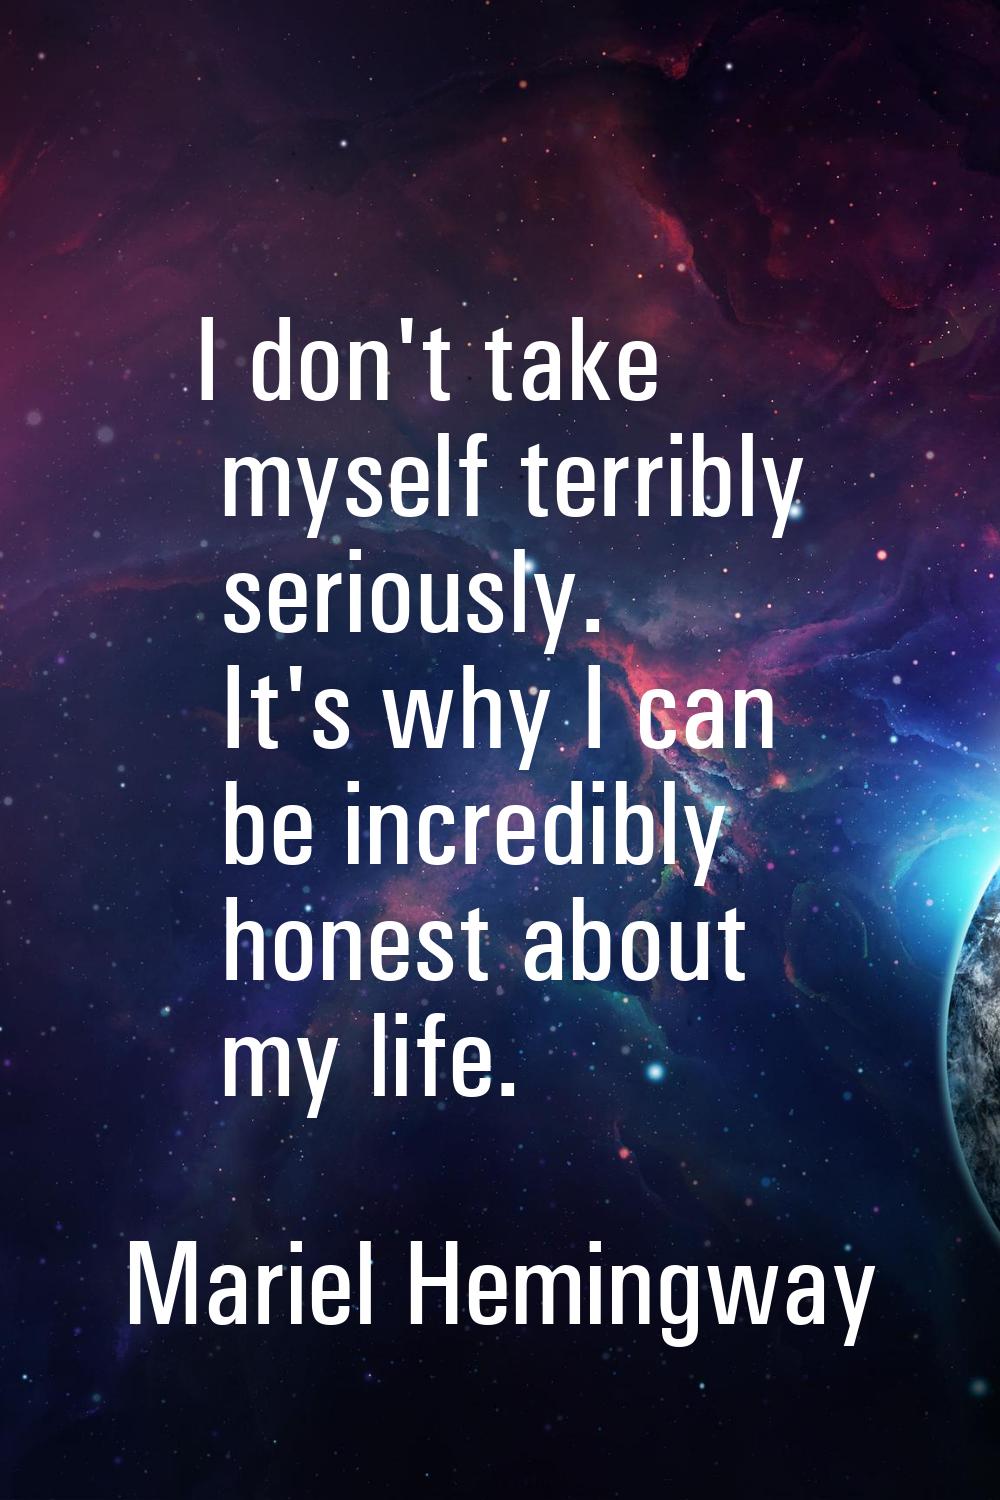 I don't take myself terribly seriously. It's why I can be incredibly honest about my life.